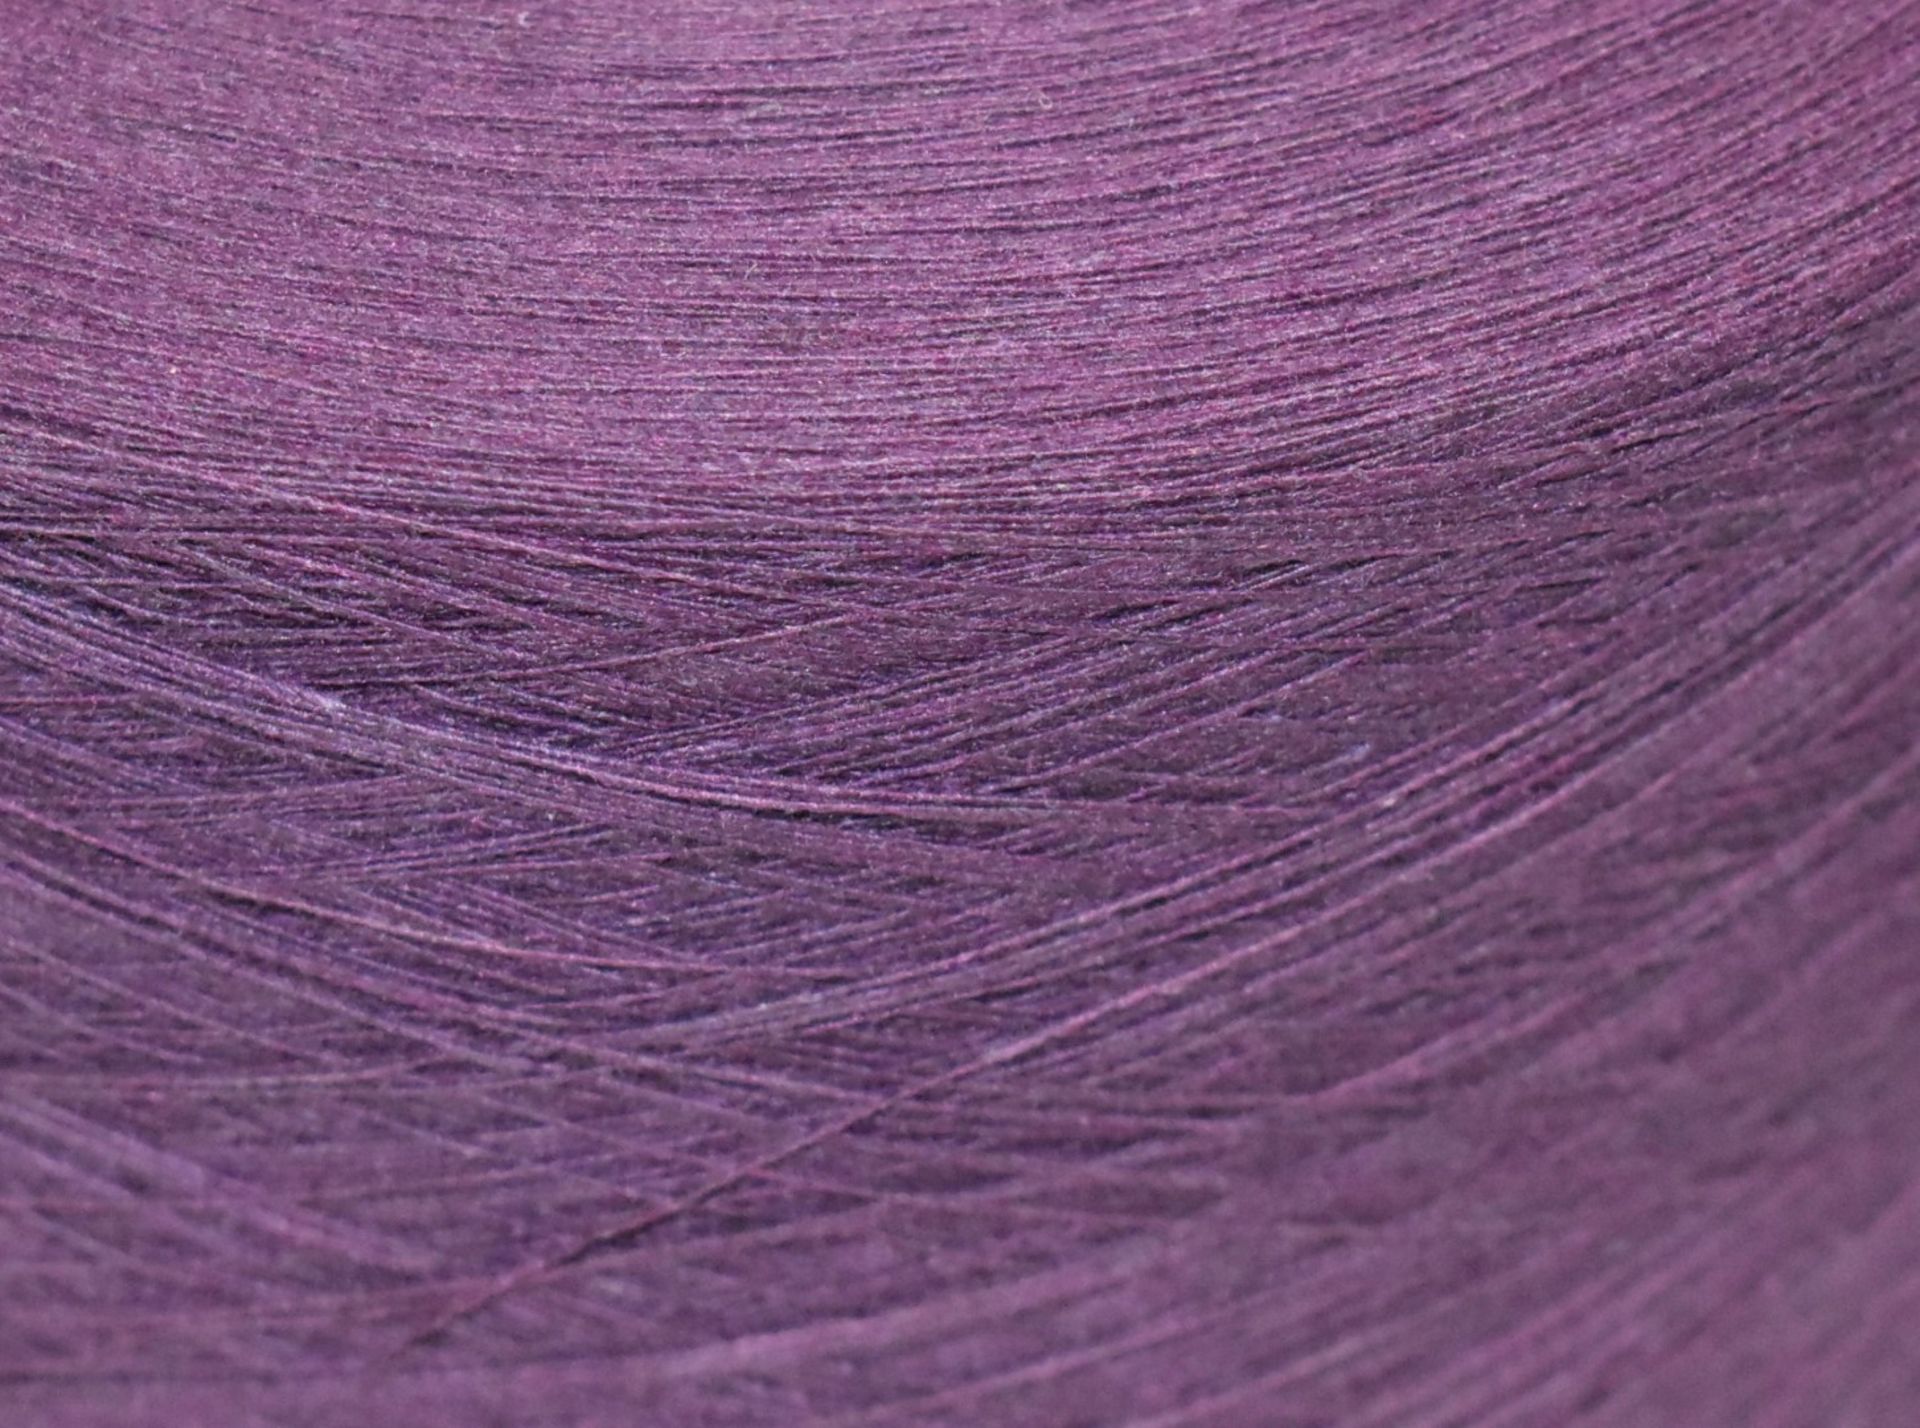 1 x Cone of 1/13 MicroCotton Knitting Yarn - Purple - Approx Weight: 2,300g - New Stock ABL Yarn - Image 4 of 13